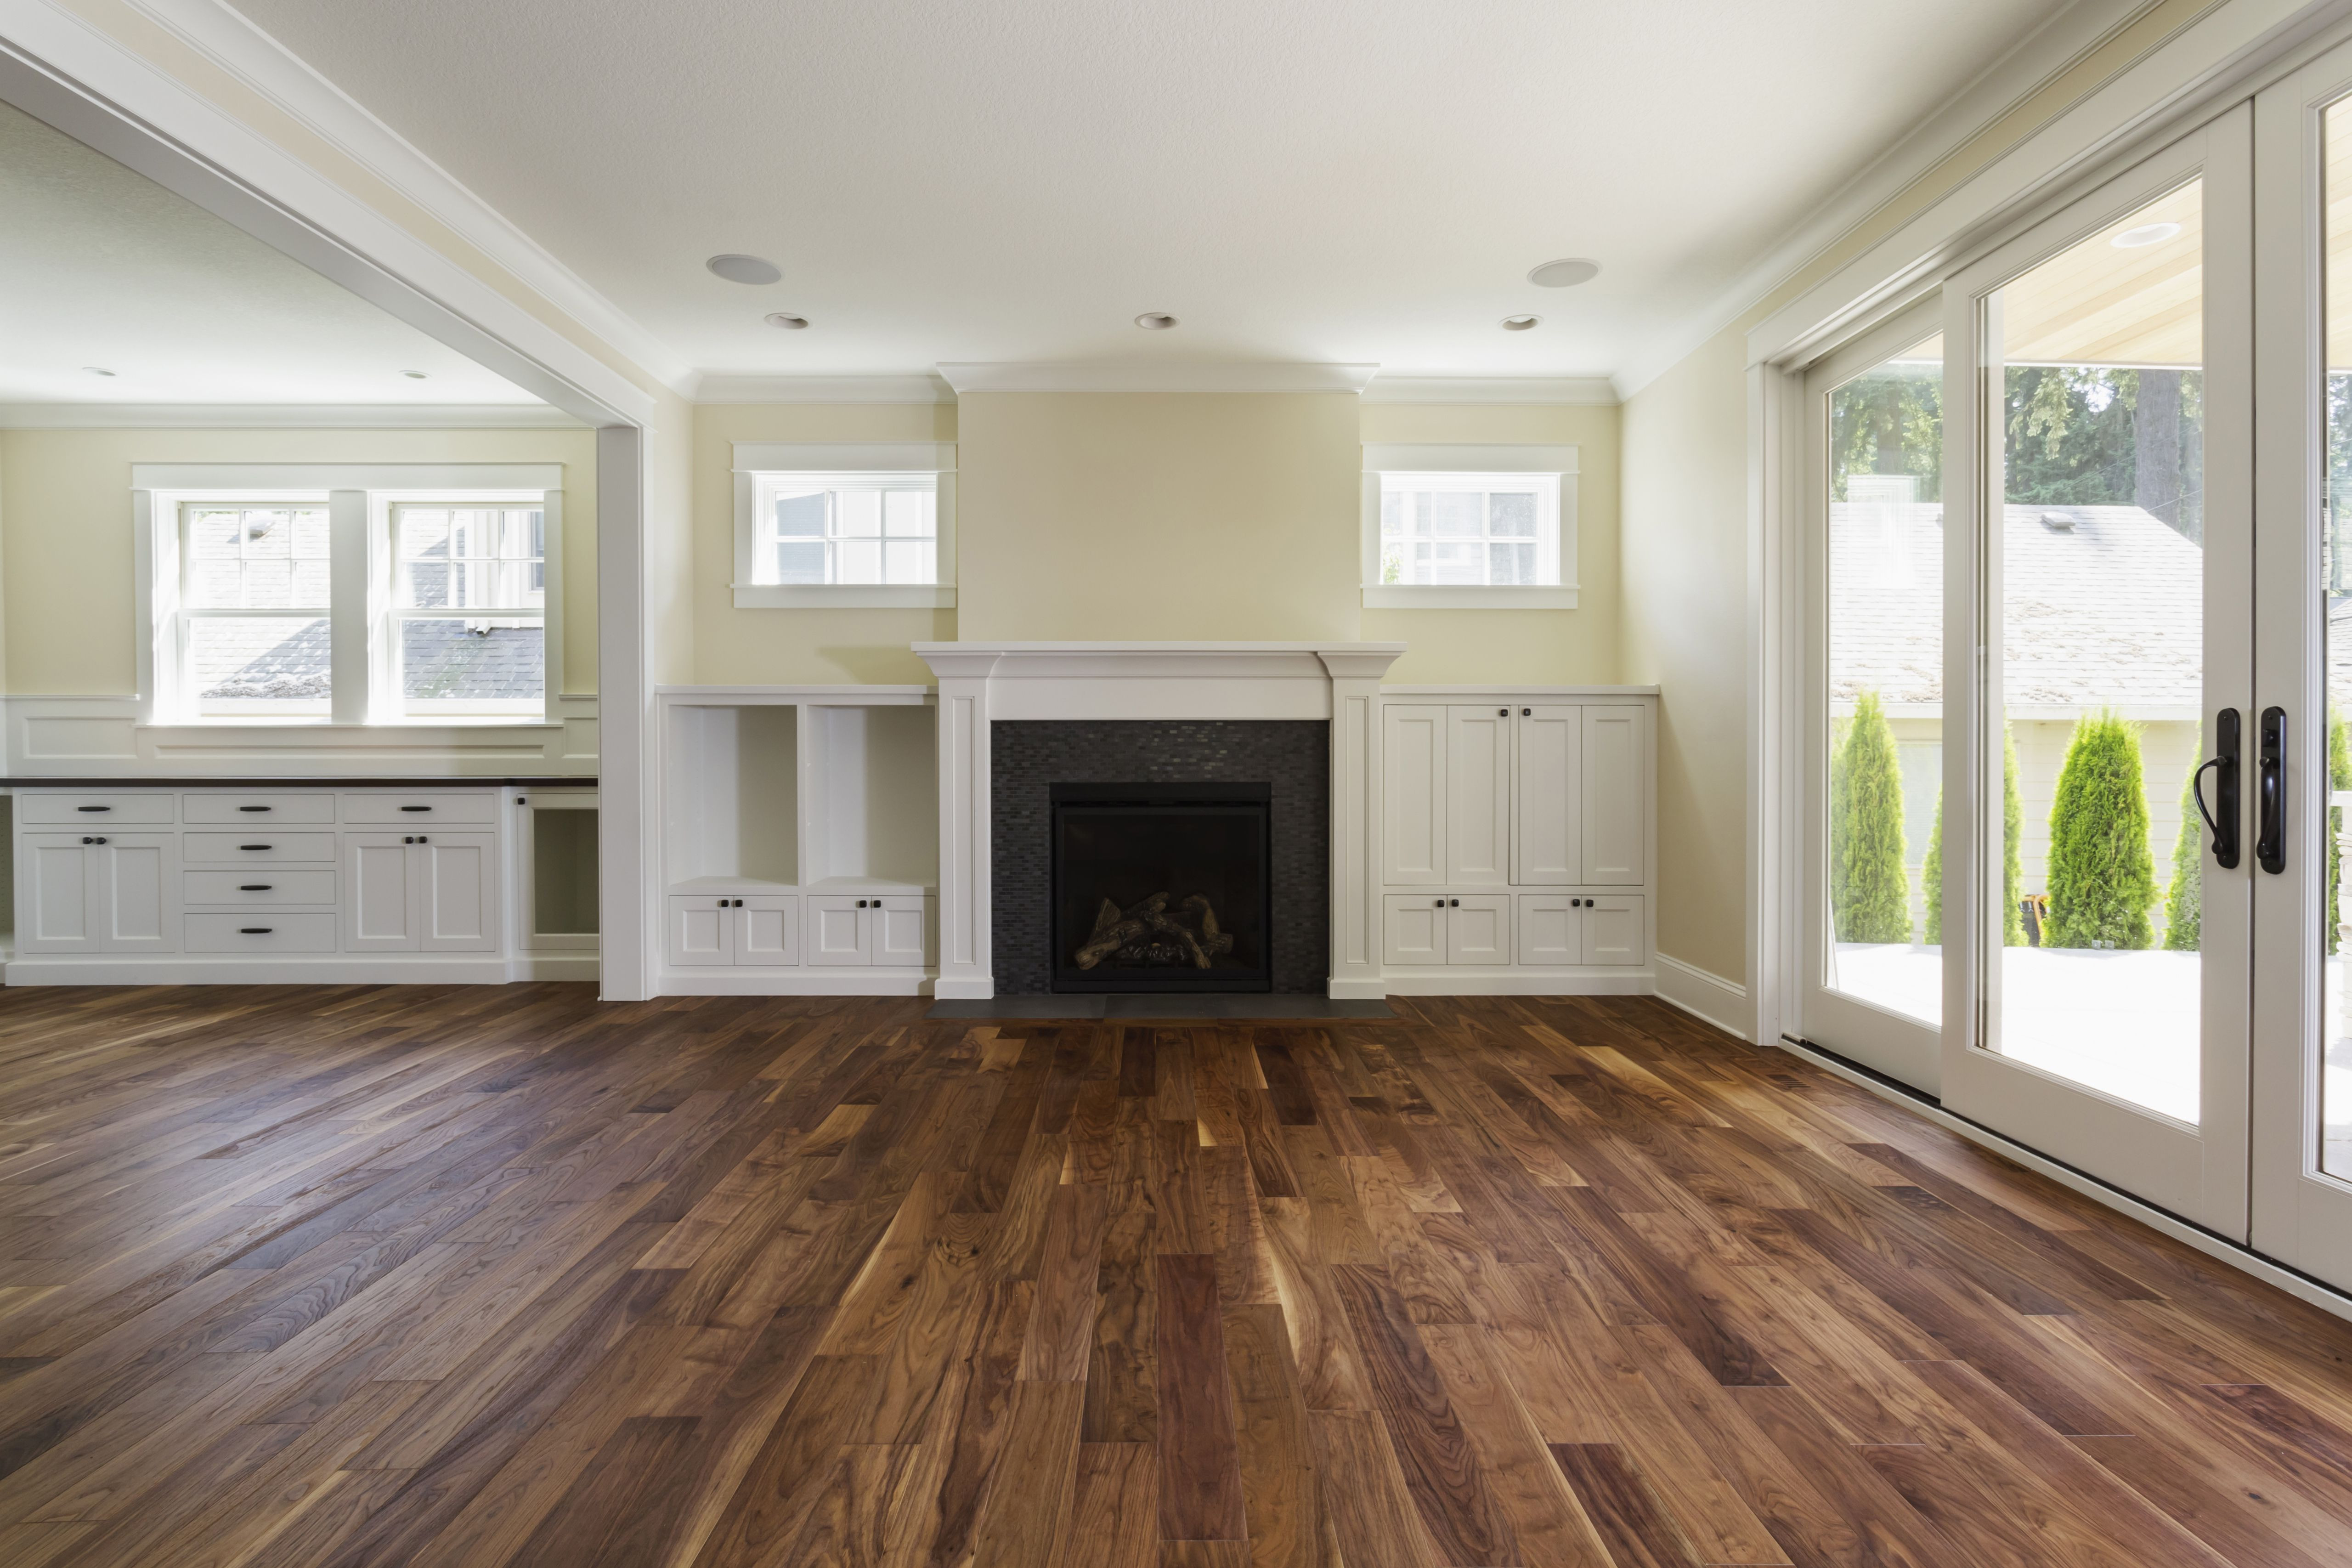 17 Perfect Hardwood Floor Deep Cleaning Machine 2022 free download hardwood floor deep cleaning machine of the pros and cons of prefinished hardwood flooring with regard to fireplace and built in shelves in living room 482143011 57bef8e33df78cc16e035397